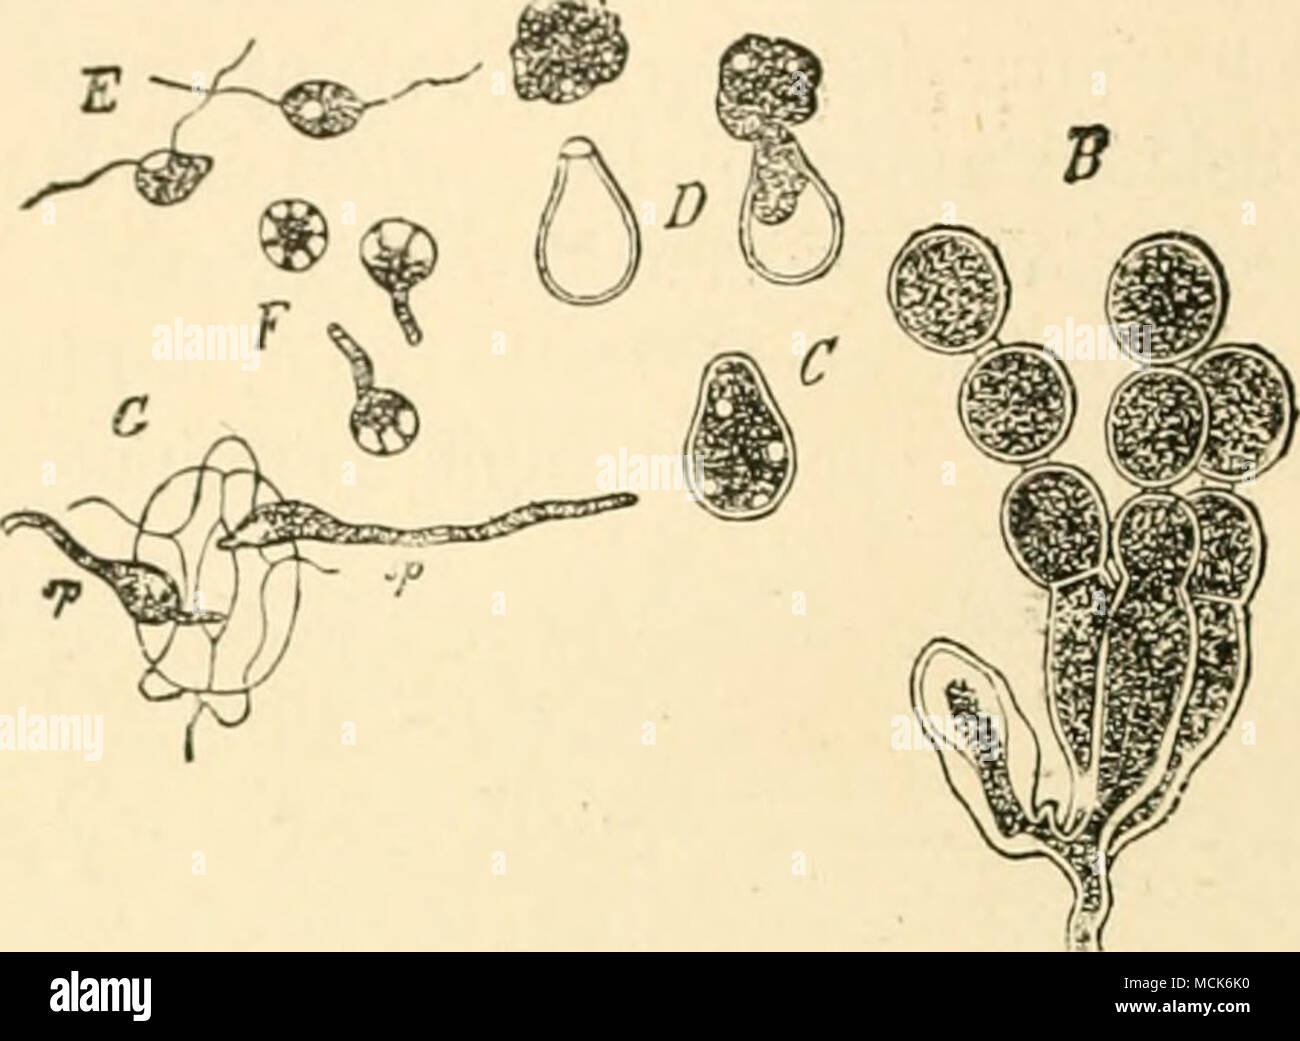 . Fig. 31.âCi/Ktopus caHdiihtn. B, Conidiophores isolated from the cushion ; the conidia or sporangia are united by intermediate cells. C, Sporangia breaking up to form swarm-spores. D, Swarm-spores escaping, is', Swarm-spores in motile condition. /â ', Swarm-spores come to rest and germinating. G, Two germ-tubes entering a stoma of Lepidium sativum; the stoma is shown from the inside, so that the spores from which the germ-tubes arise are pn the outer surface and unseen. (After iJe Bary.) Stock Photo